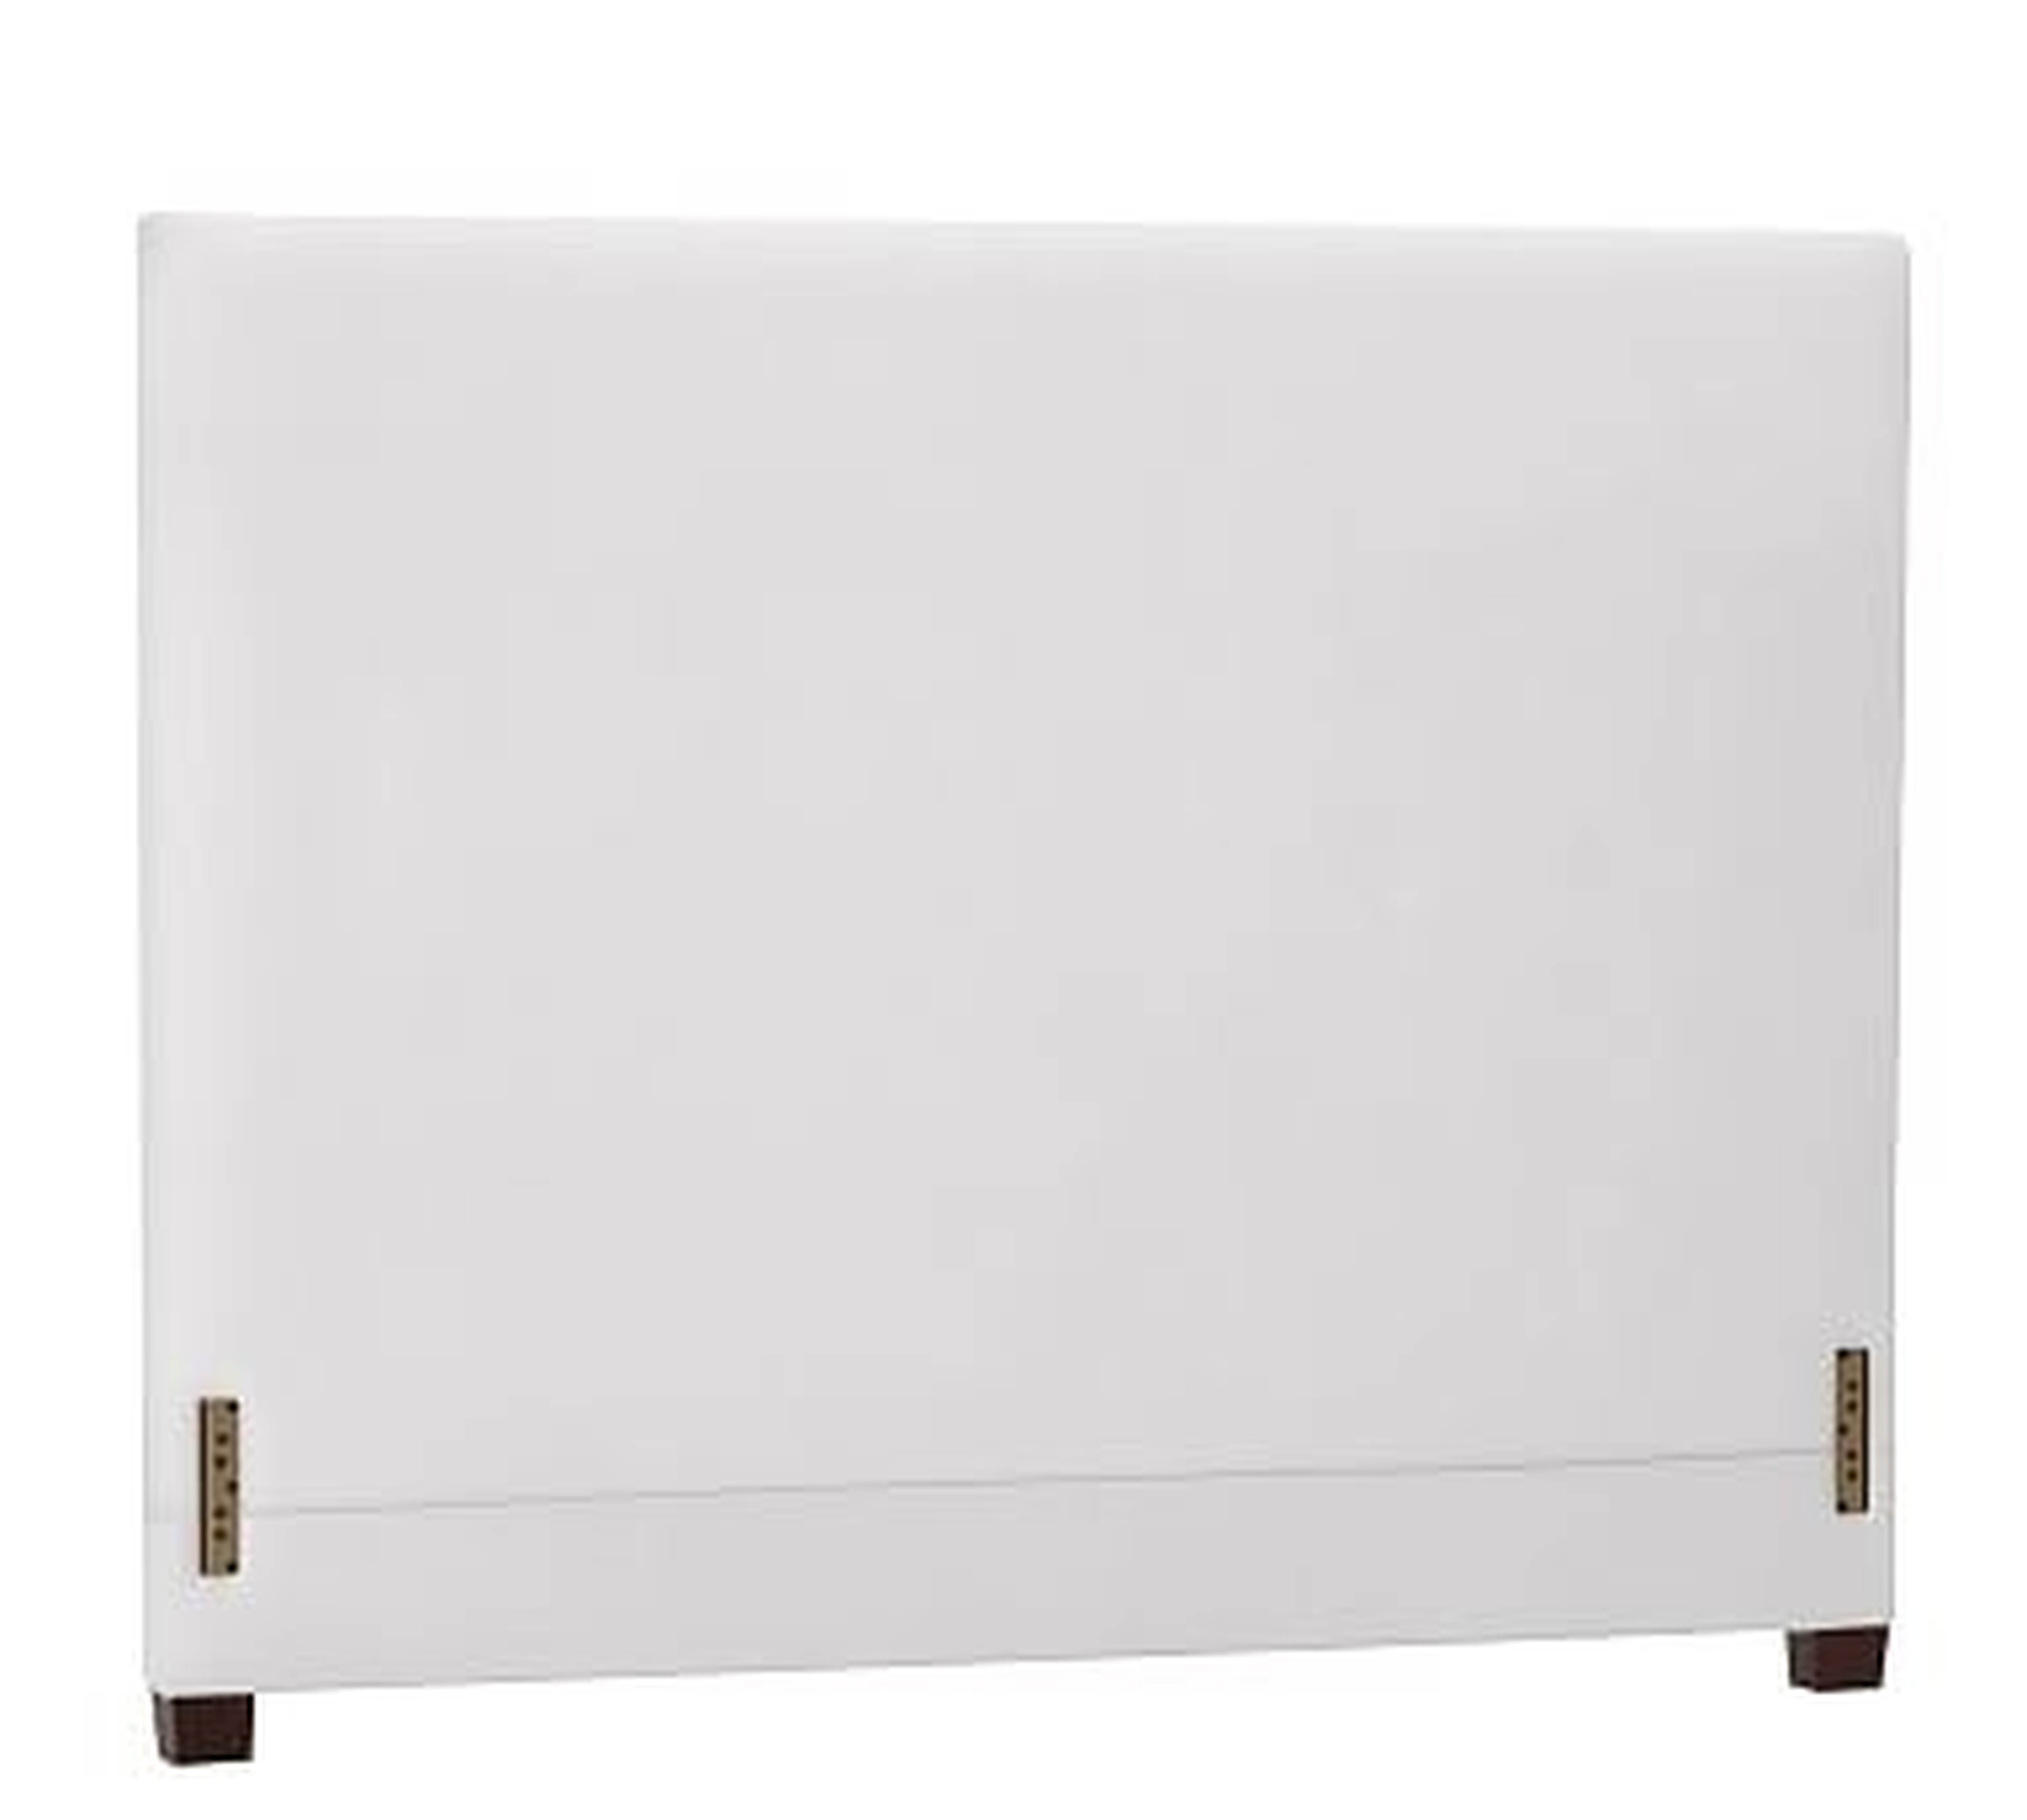 Raleigh Square Upholstered Tall Headboard 53"h, without Nailheads, Queen, Twill White - Pottery Barn